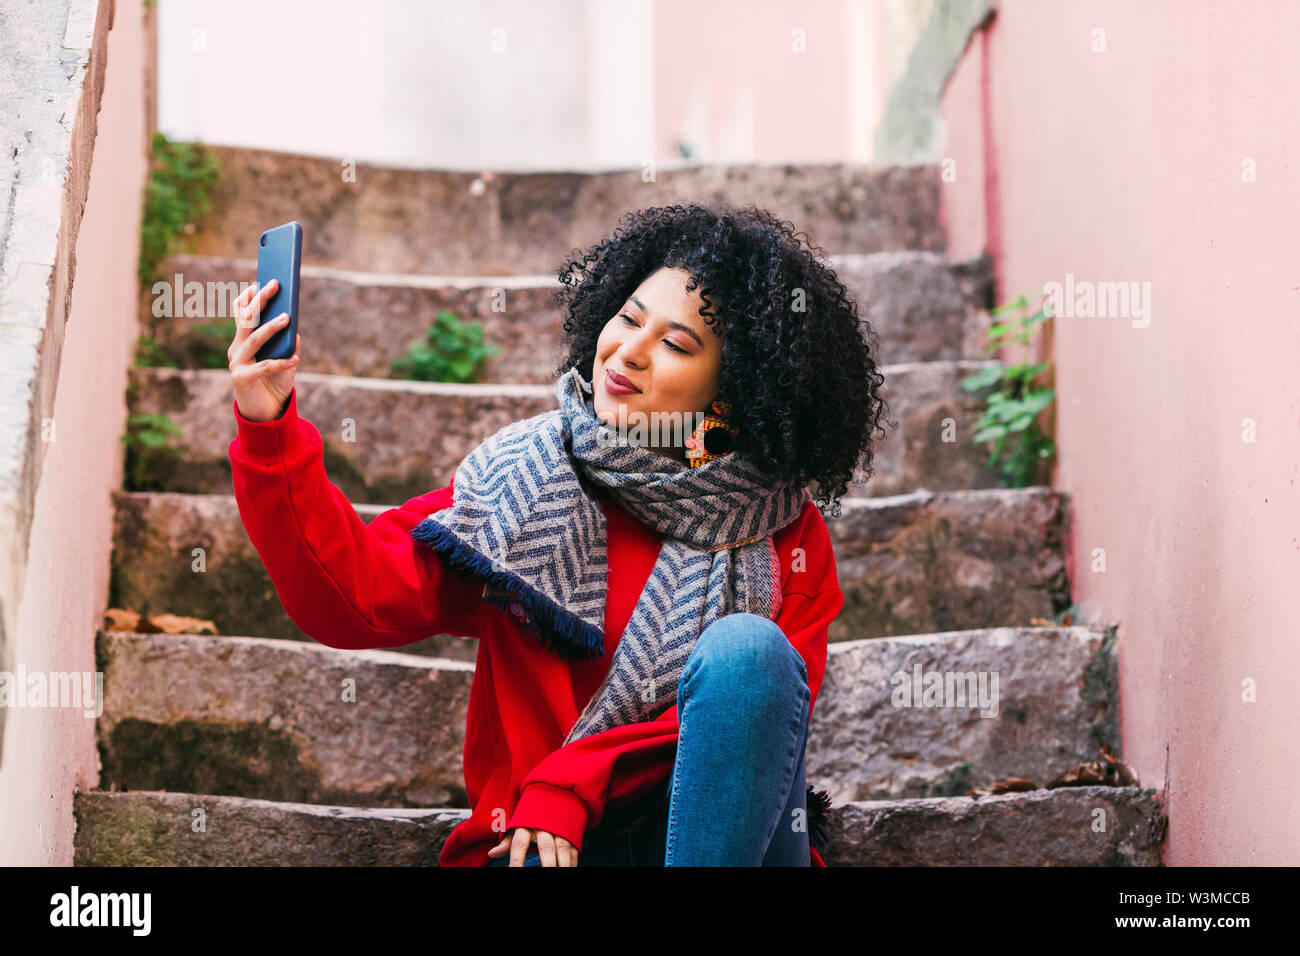 Young woman taking selfie on steps Stock Photo